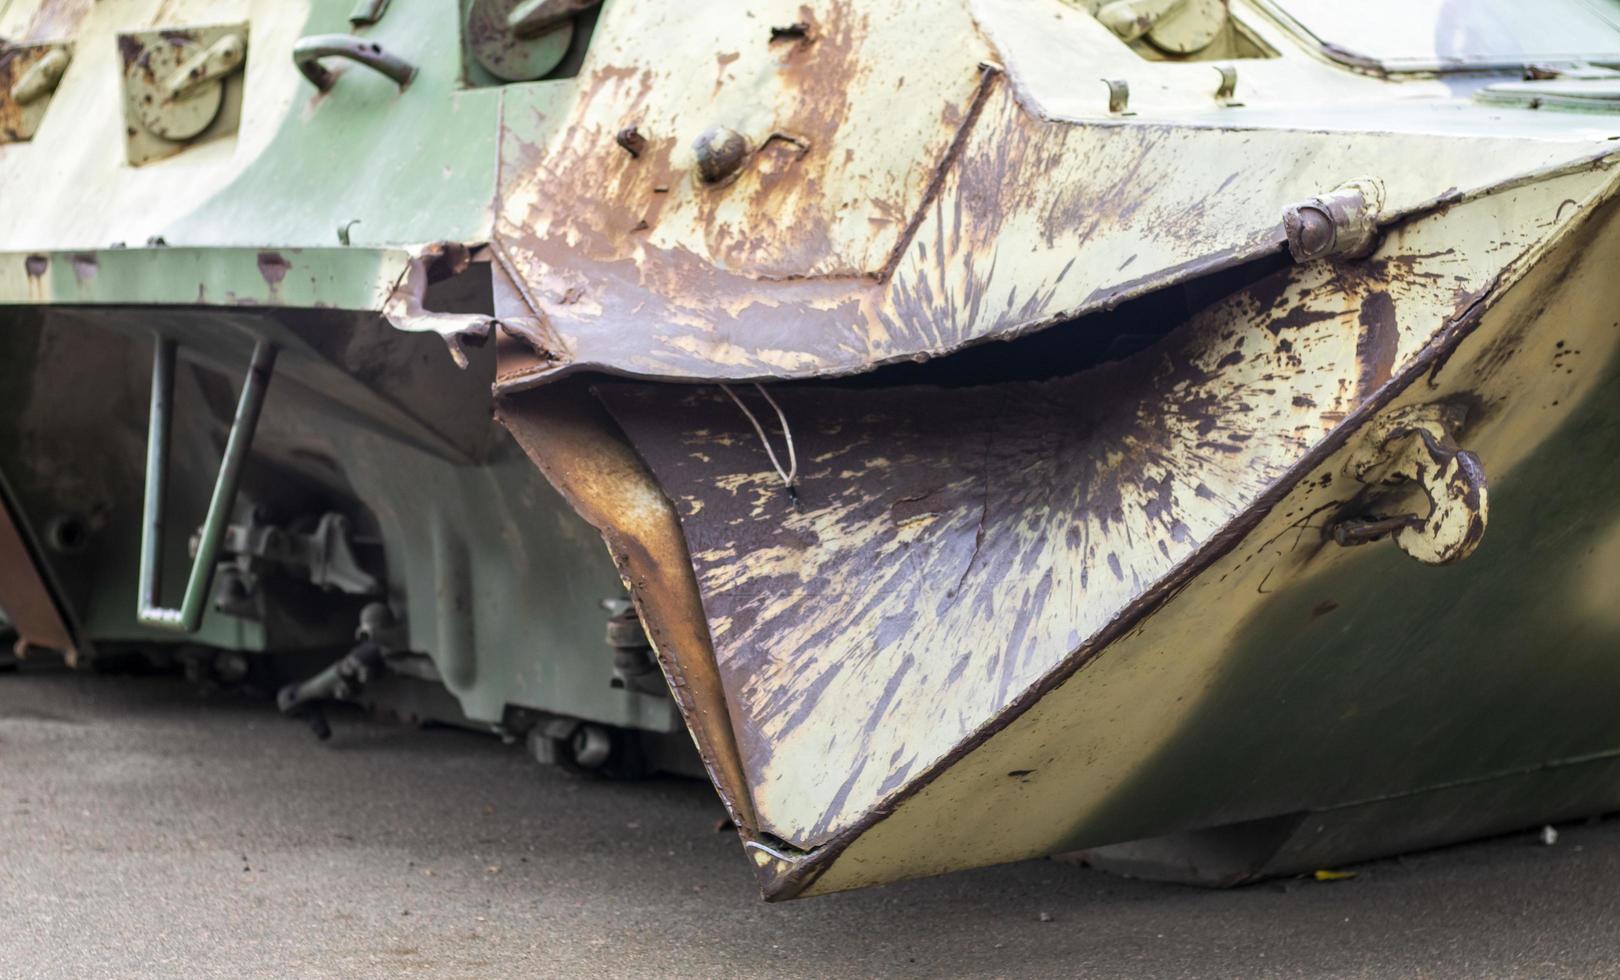 Russian combat vehicle, with holes in the armor. Destroyed military armored vehicles, disabled, blown up and destroyed. Armor metal background with bullet holes. Hole from cumulative penetration. photo